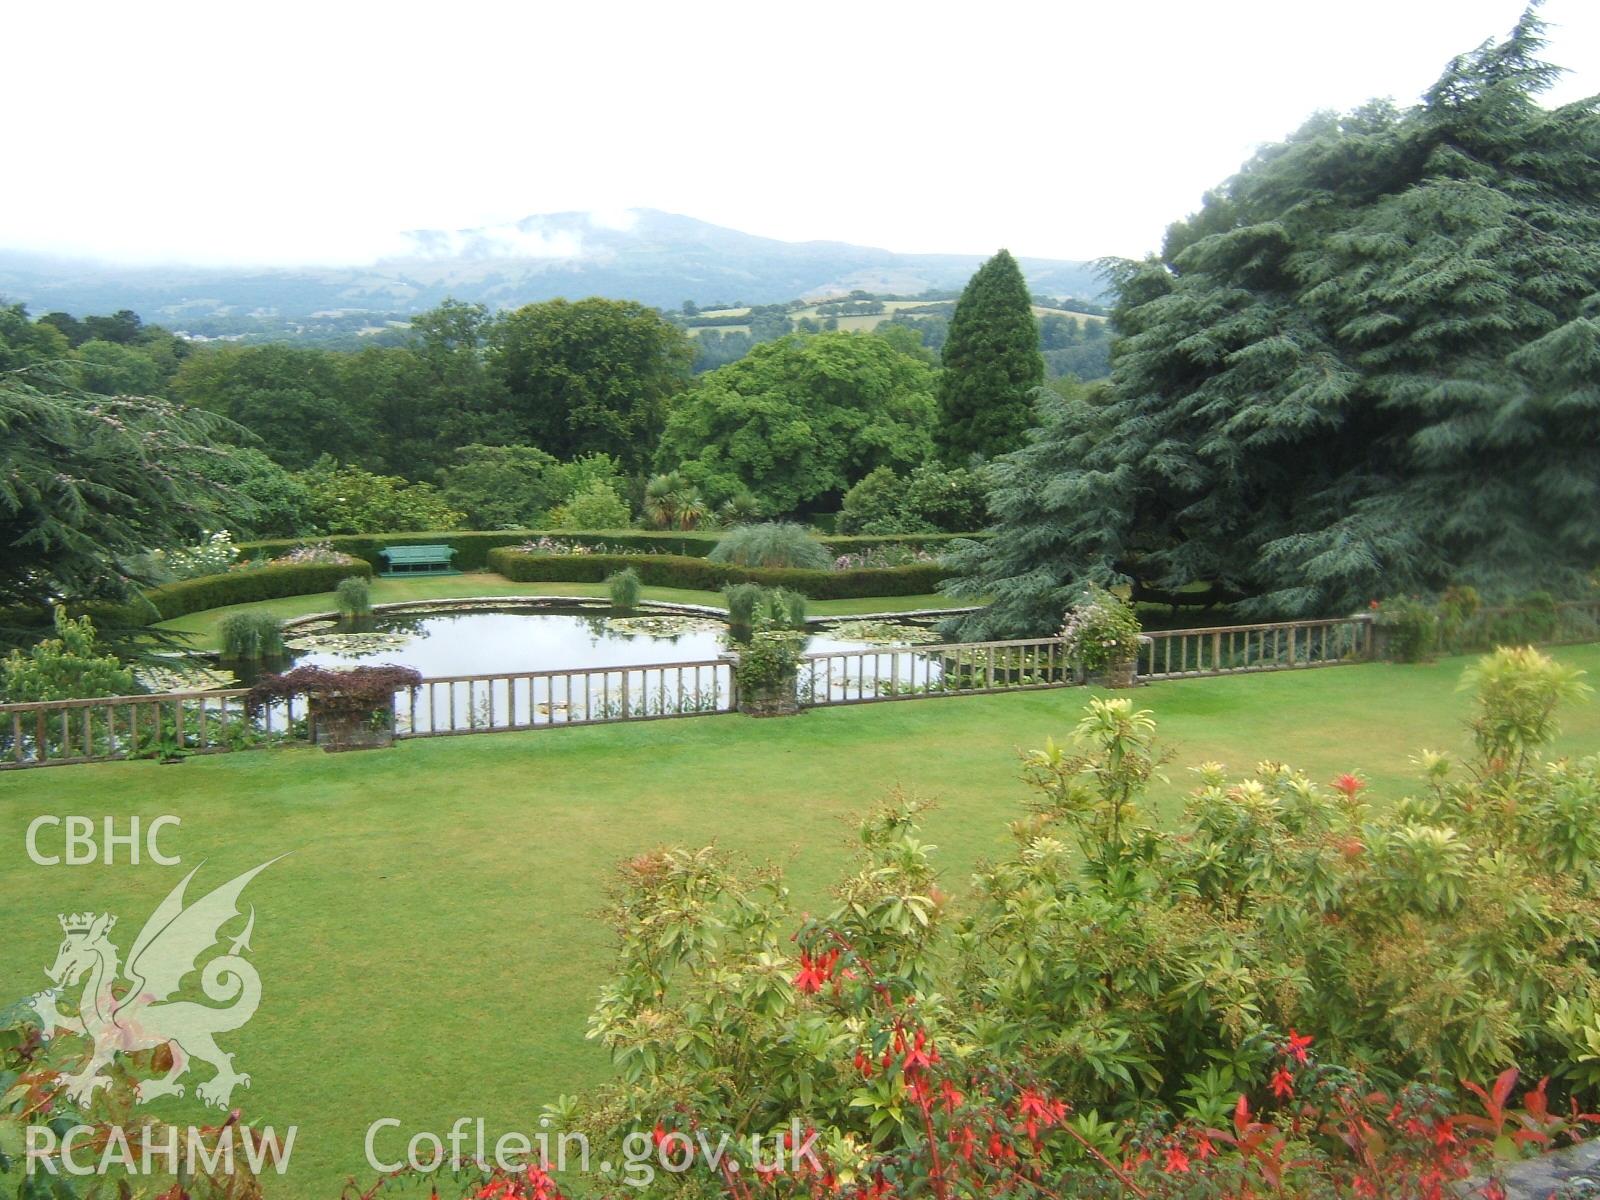 View from the Rose Terrace looking west over the Croquet Lawn and Lily Pond to the mountains beyond.